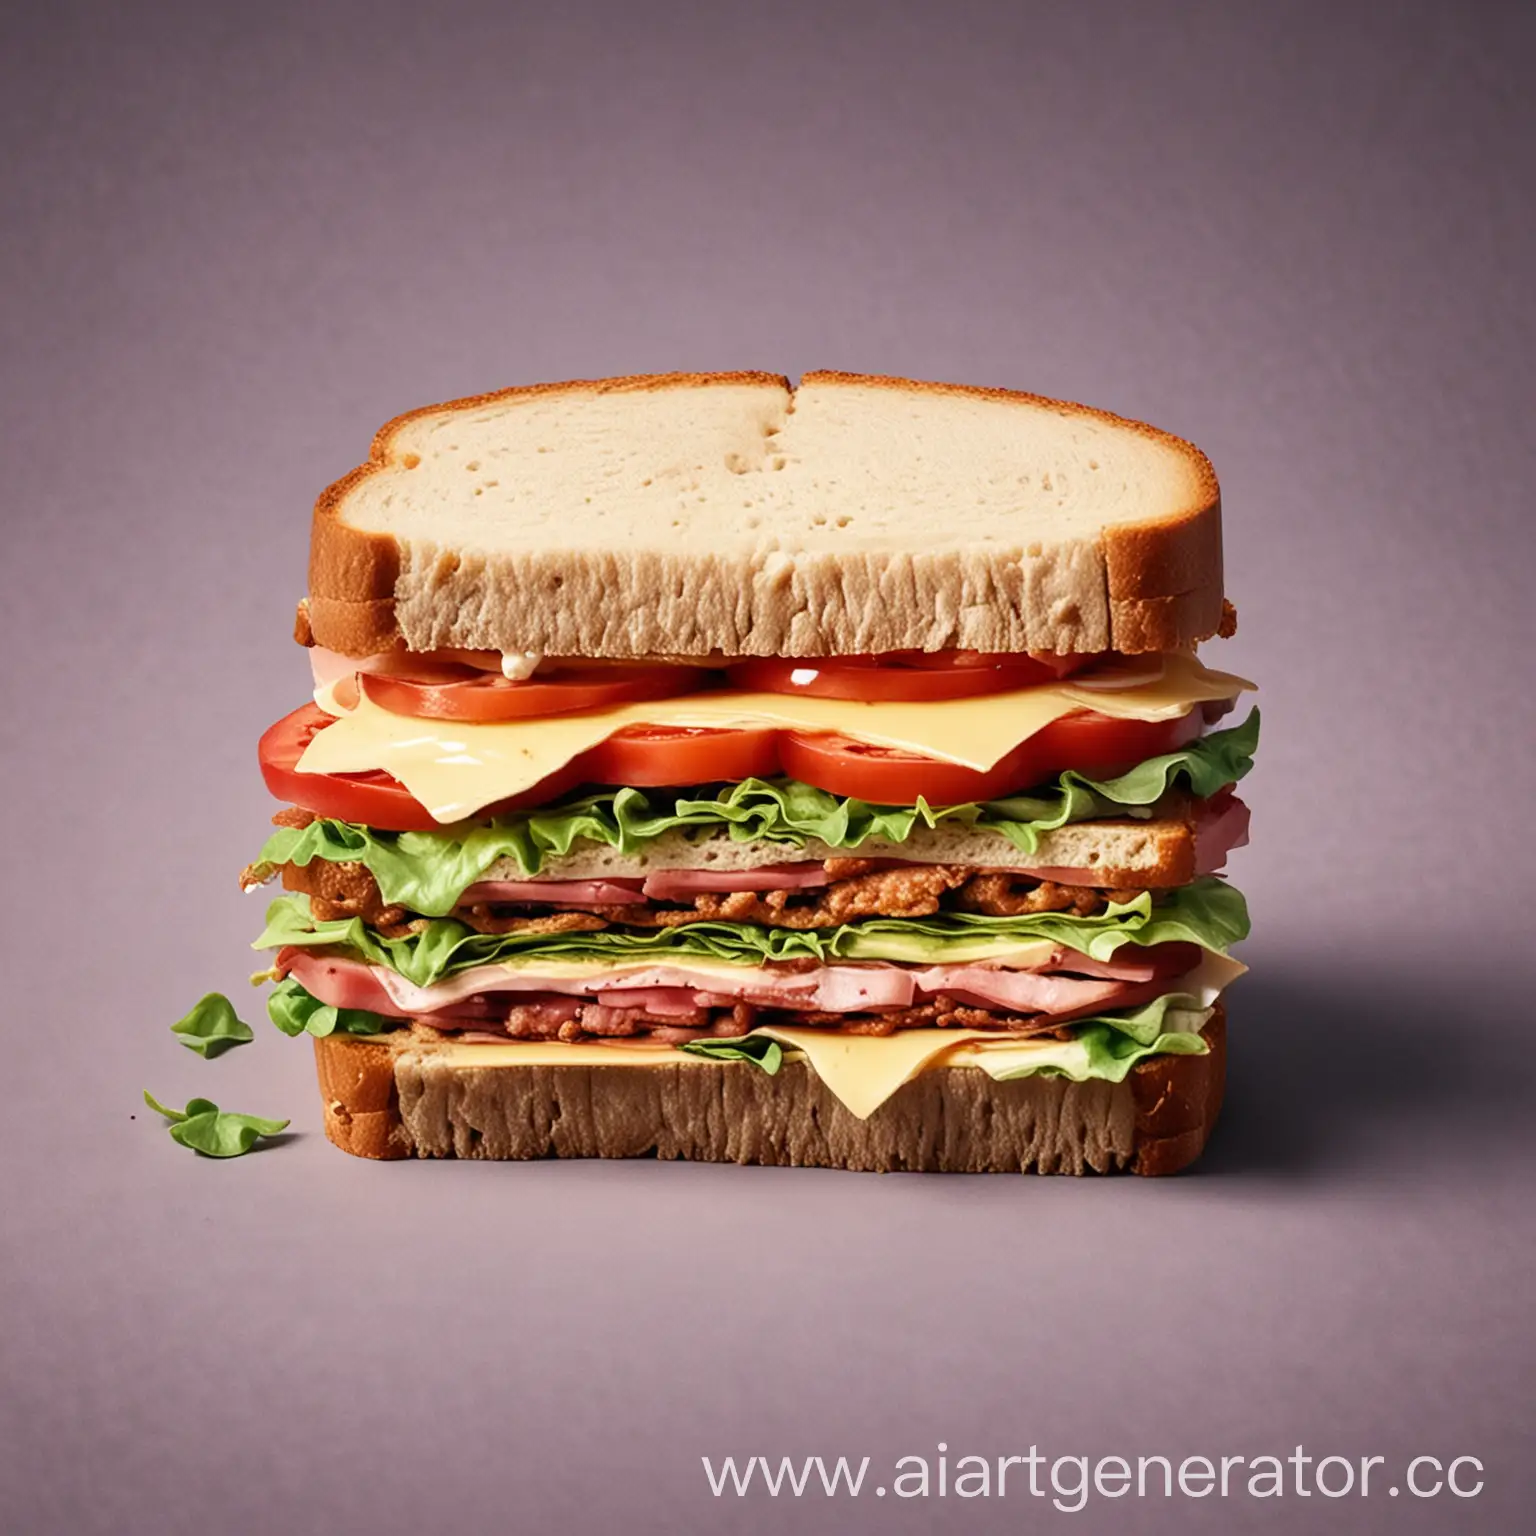 Retro-90s-Style-Sandwich-Colorful-Ingredients-on-Checkerboard-Plate